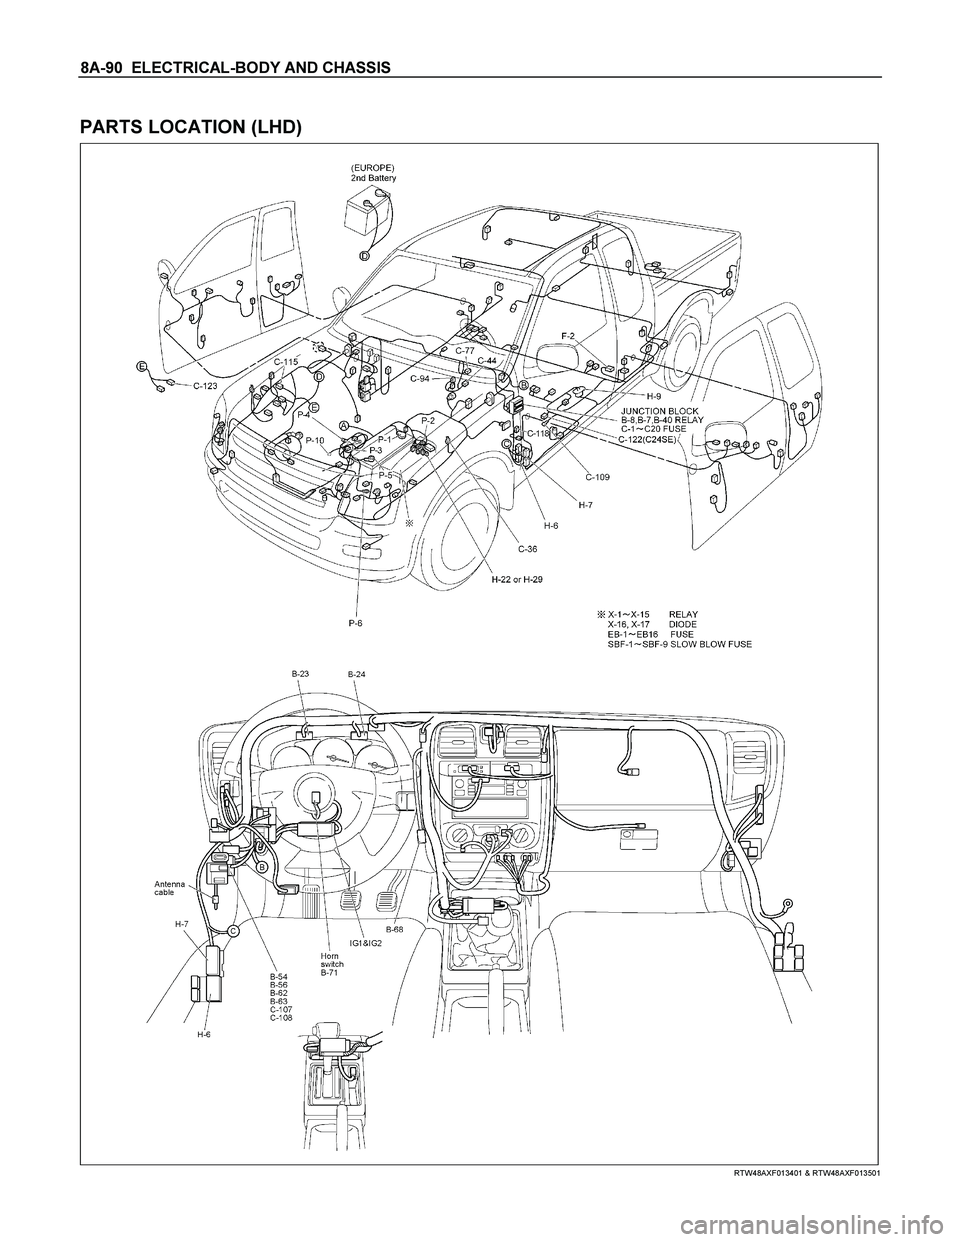 ISUZU TF SERIES 2004  Workshop Manual 8A-90  ELECTRICAL-BODY AND CHASSIS 
 
PARTS LOCATION (LHD) 
  
 
 
 
 
RTW48AXF013401 & RTW48AXF013501  